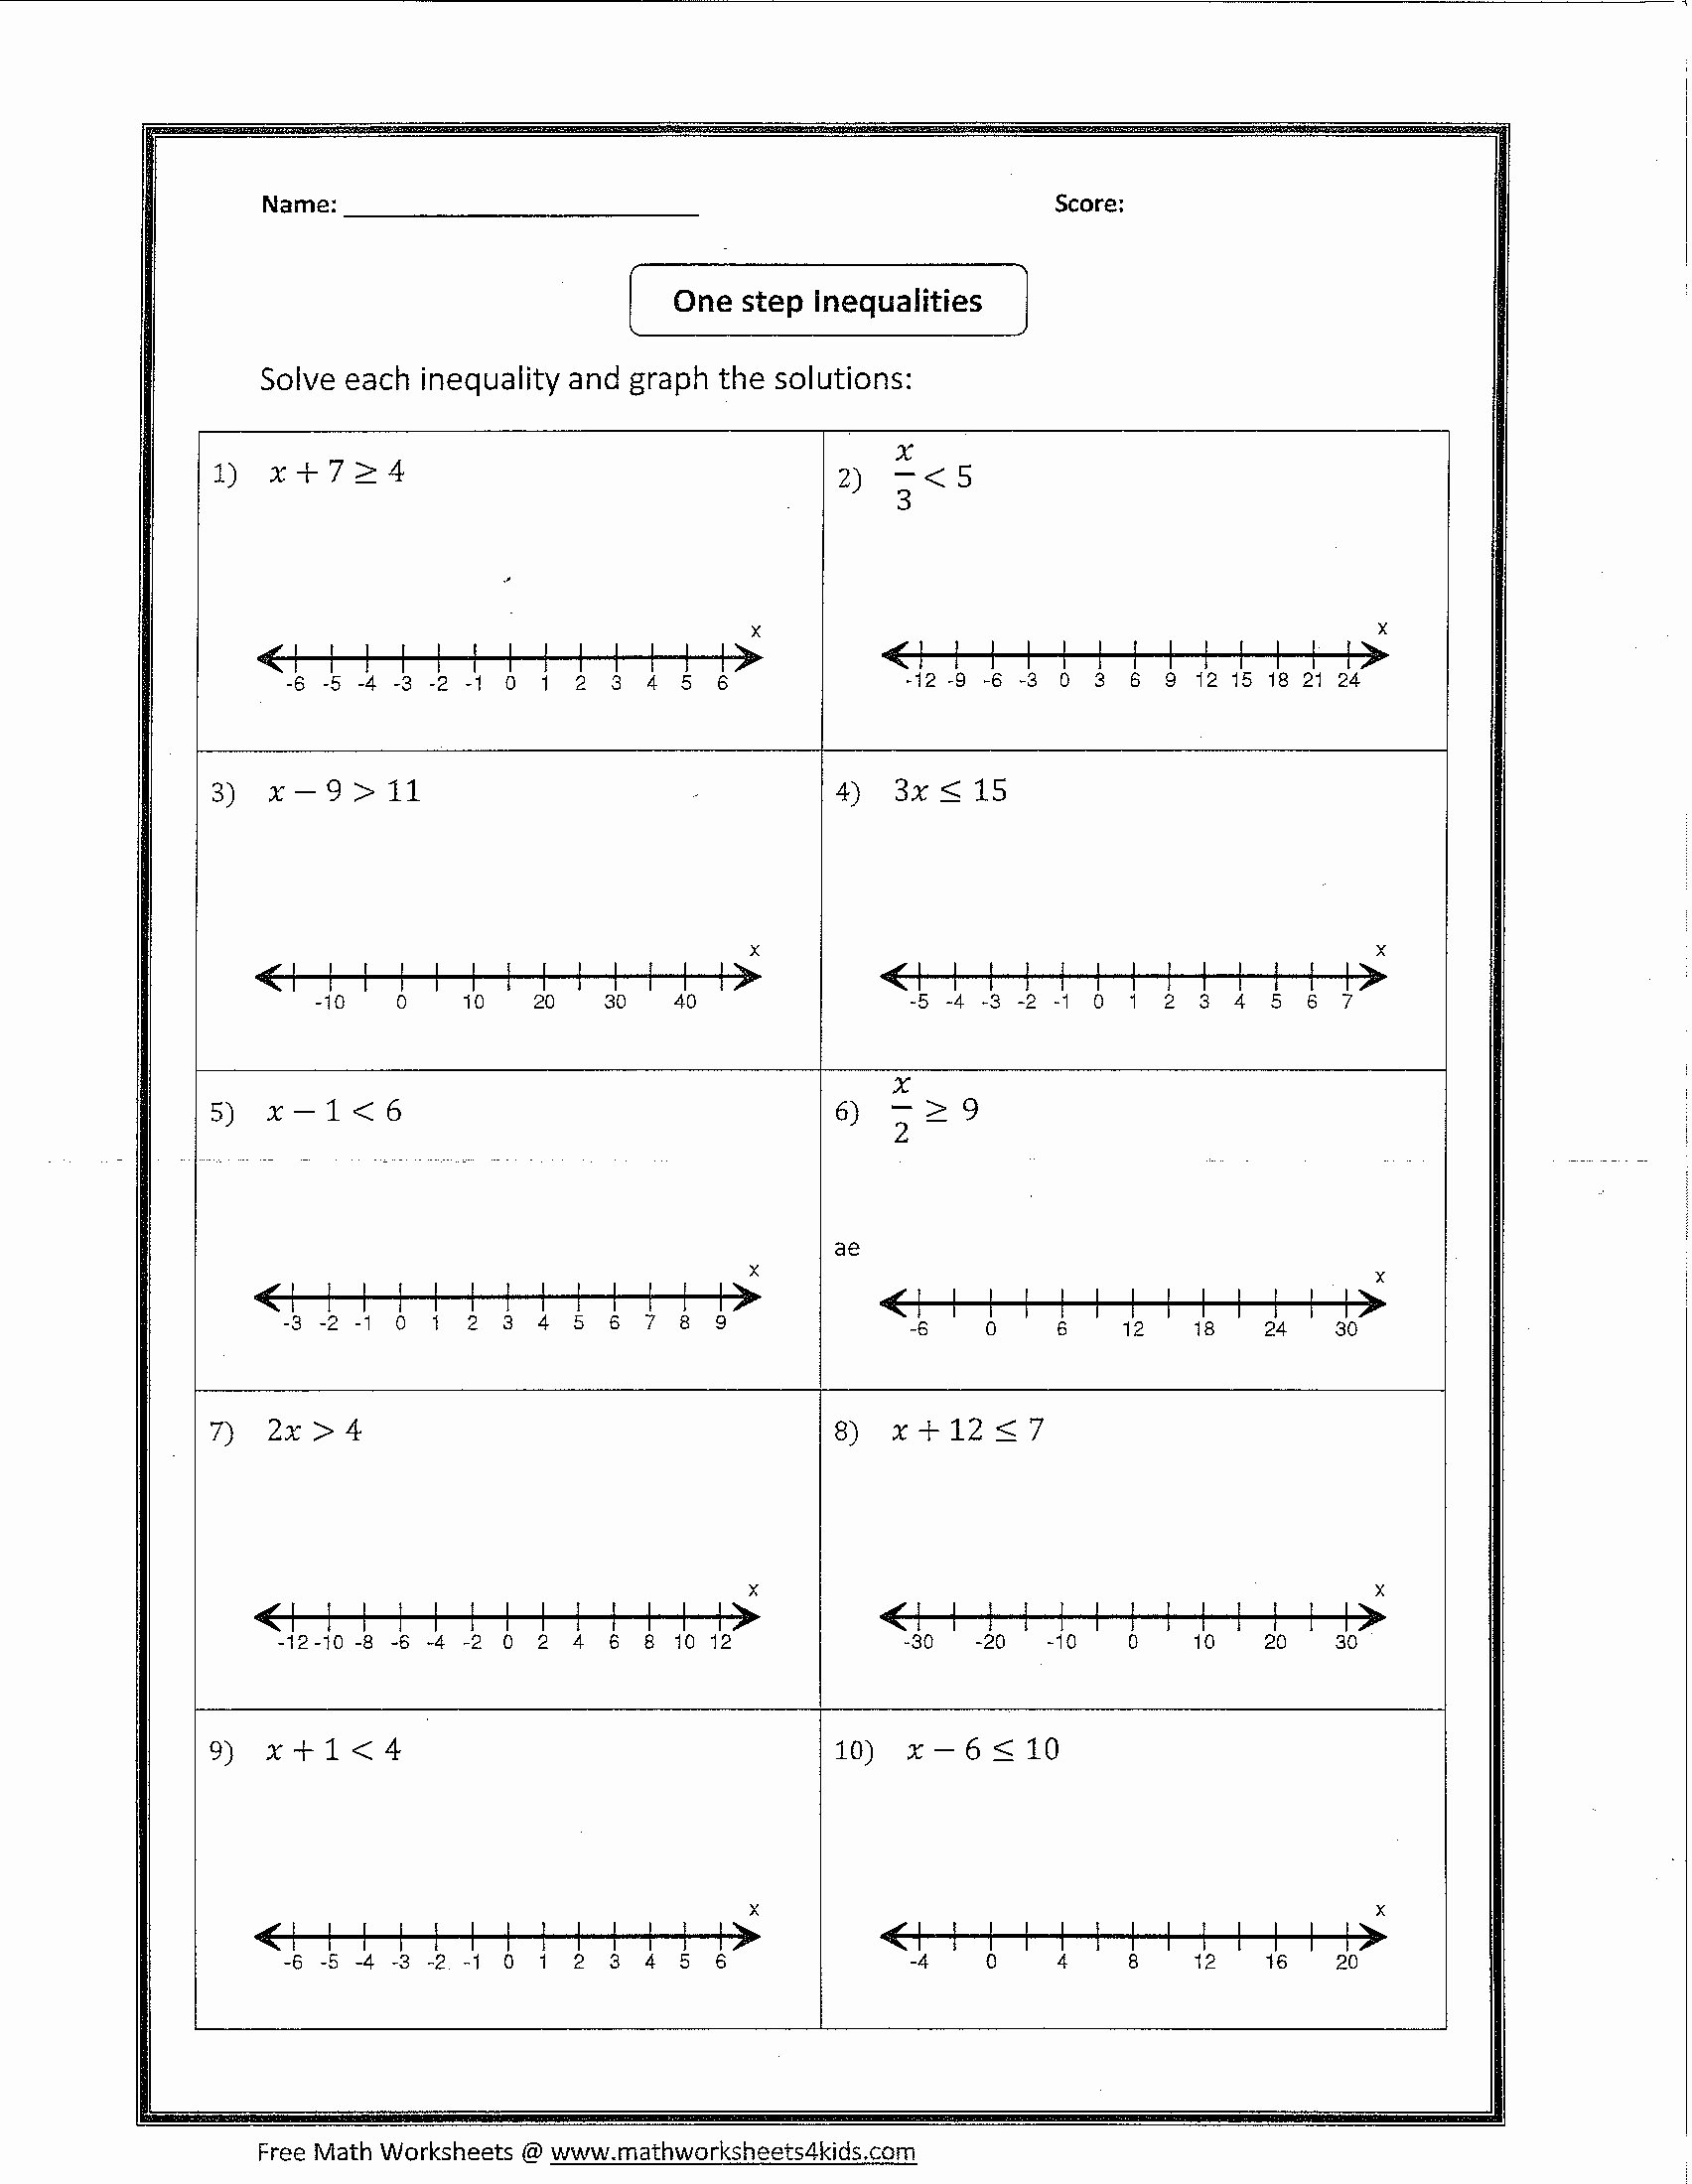 Solving One Step Inequalities Worksheet Awesome 15 Best Of solving and Graphing Inequalities